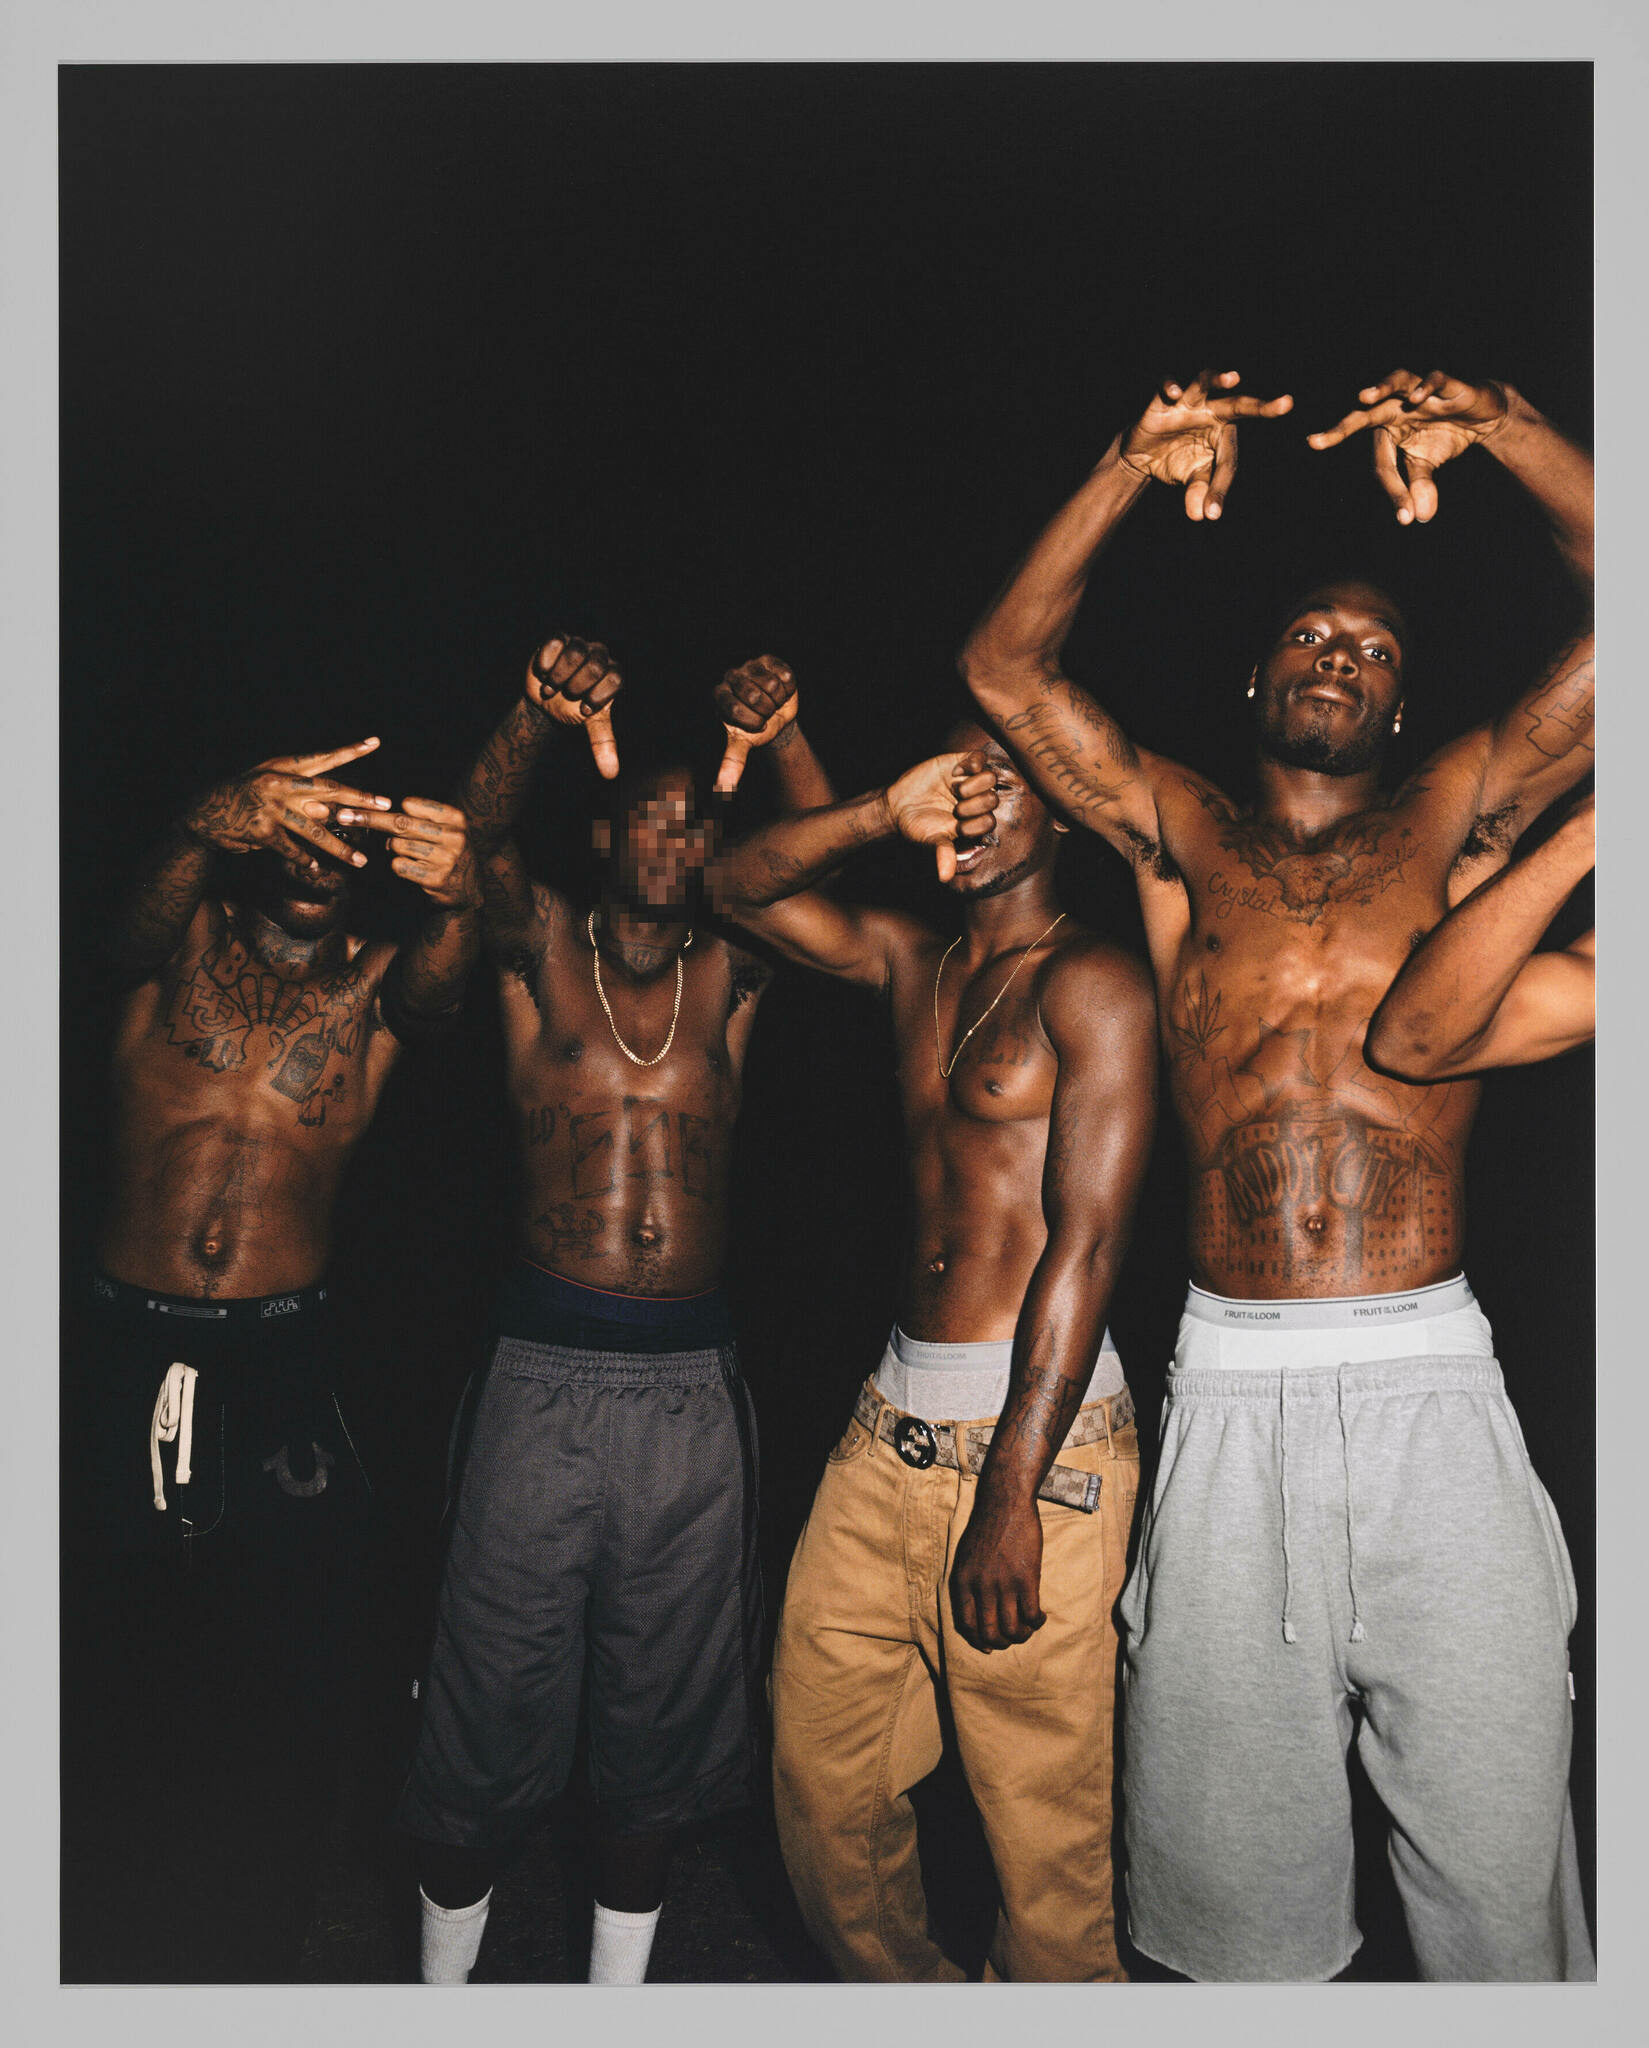 Four standing and shirtless Black men facing and signing at the photographer against a black background. One man's face is blurred.